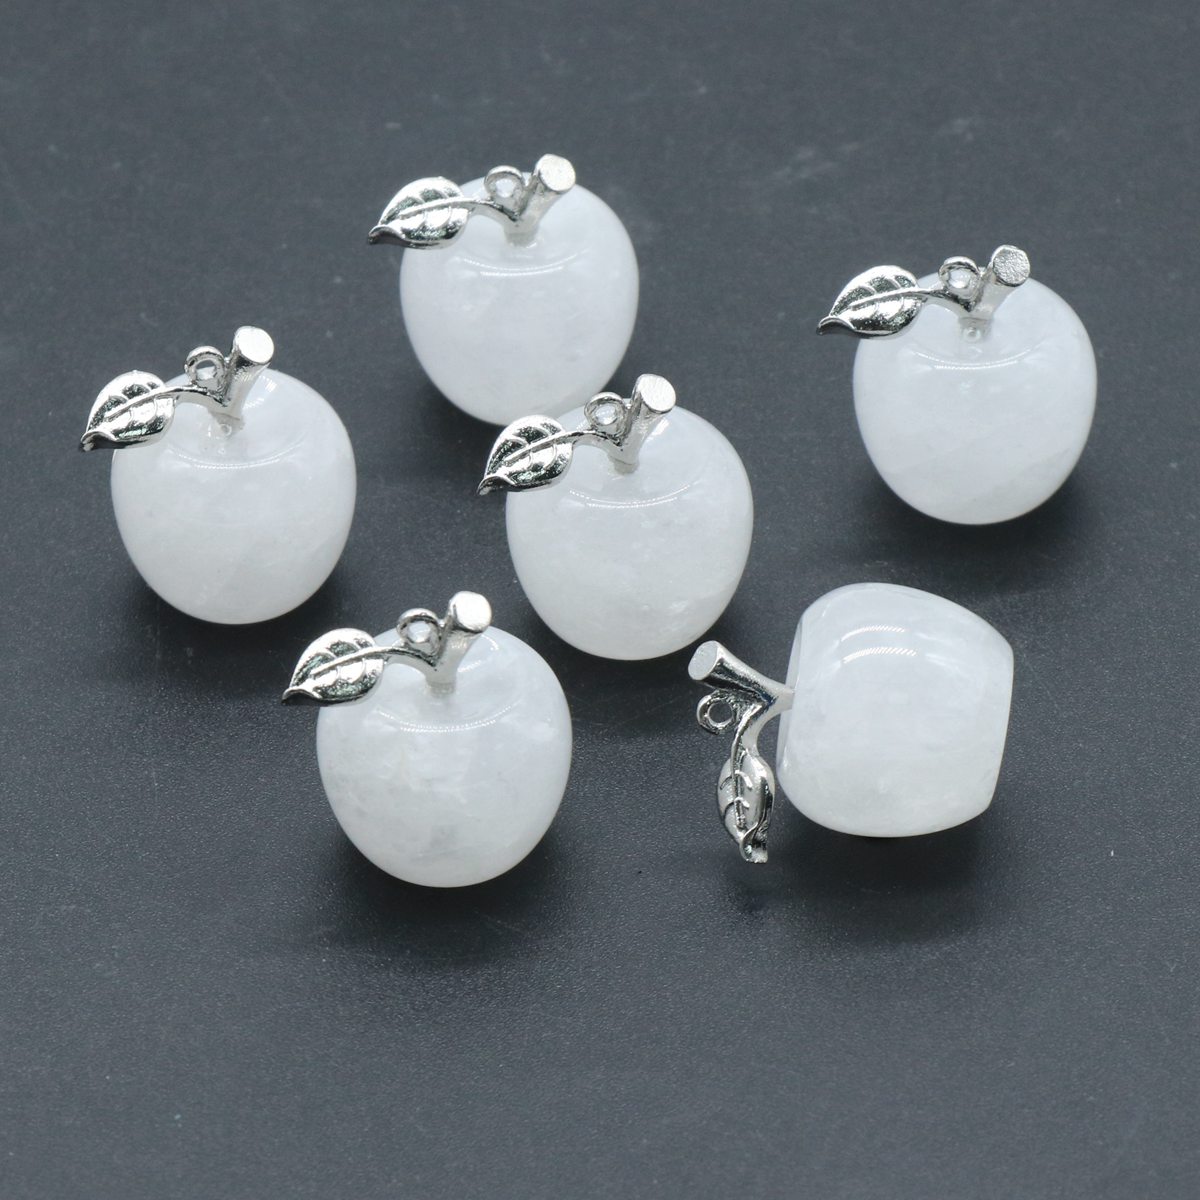 Wholesale Carved Polished Natural Clear Crystal Stone Apple Paperweight Decoration For Christmas Birthday Presents